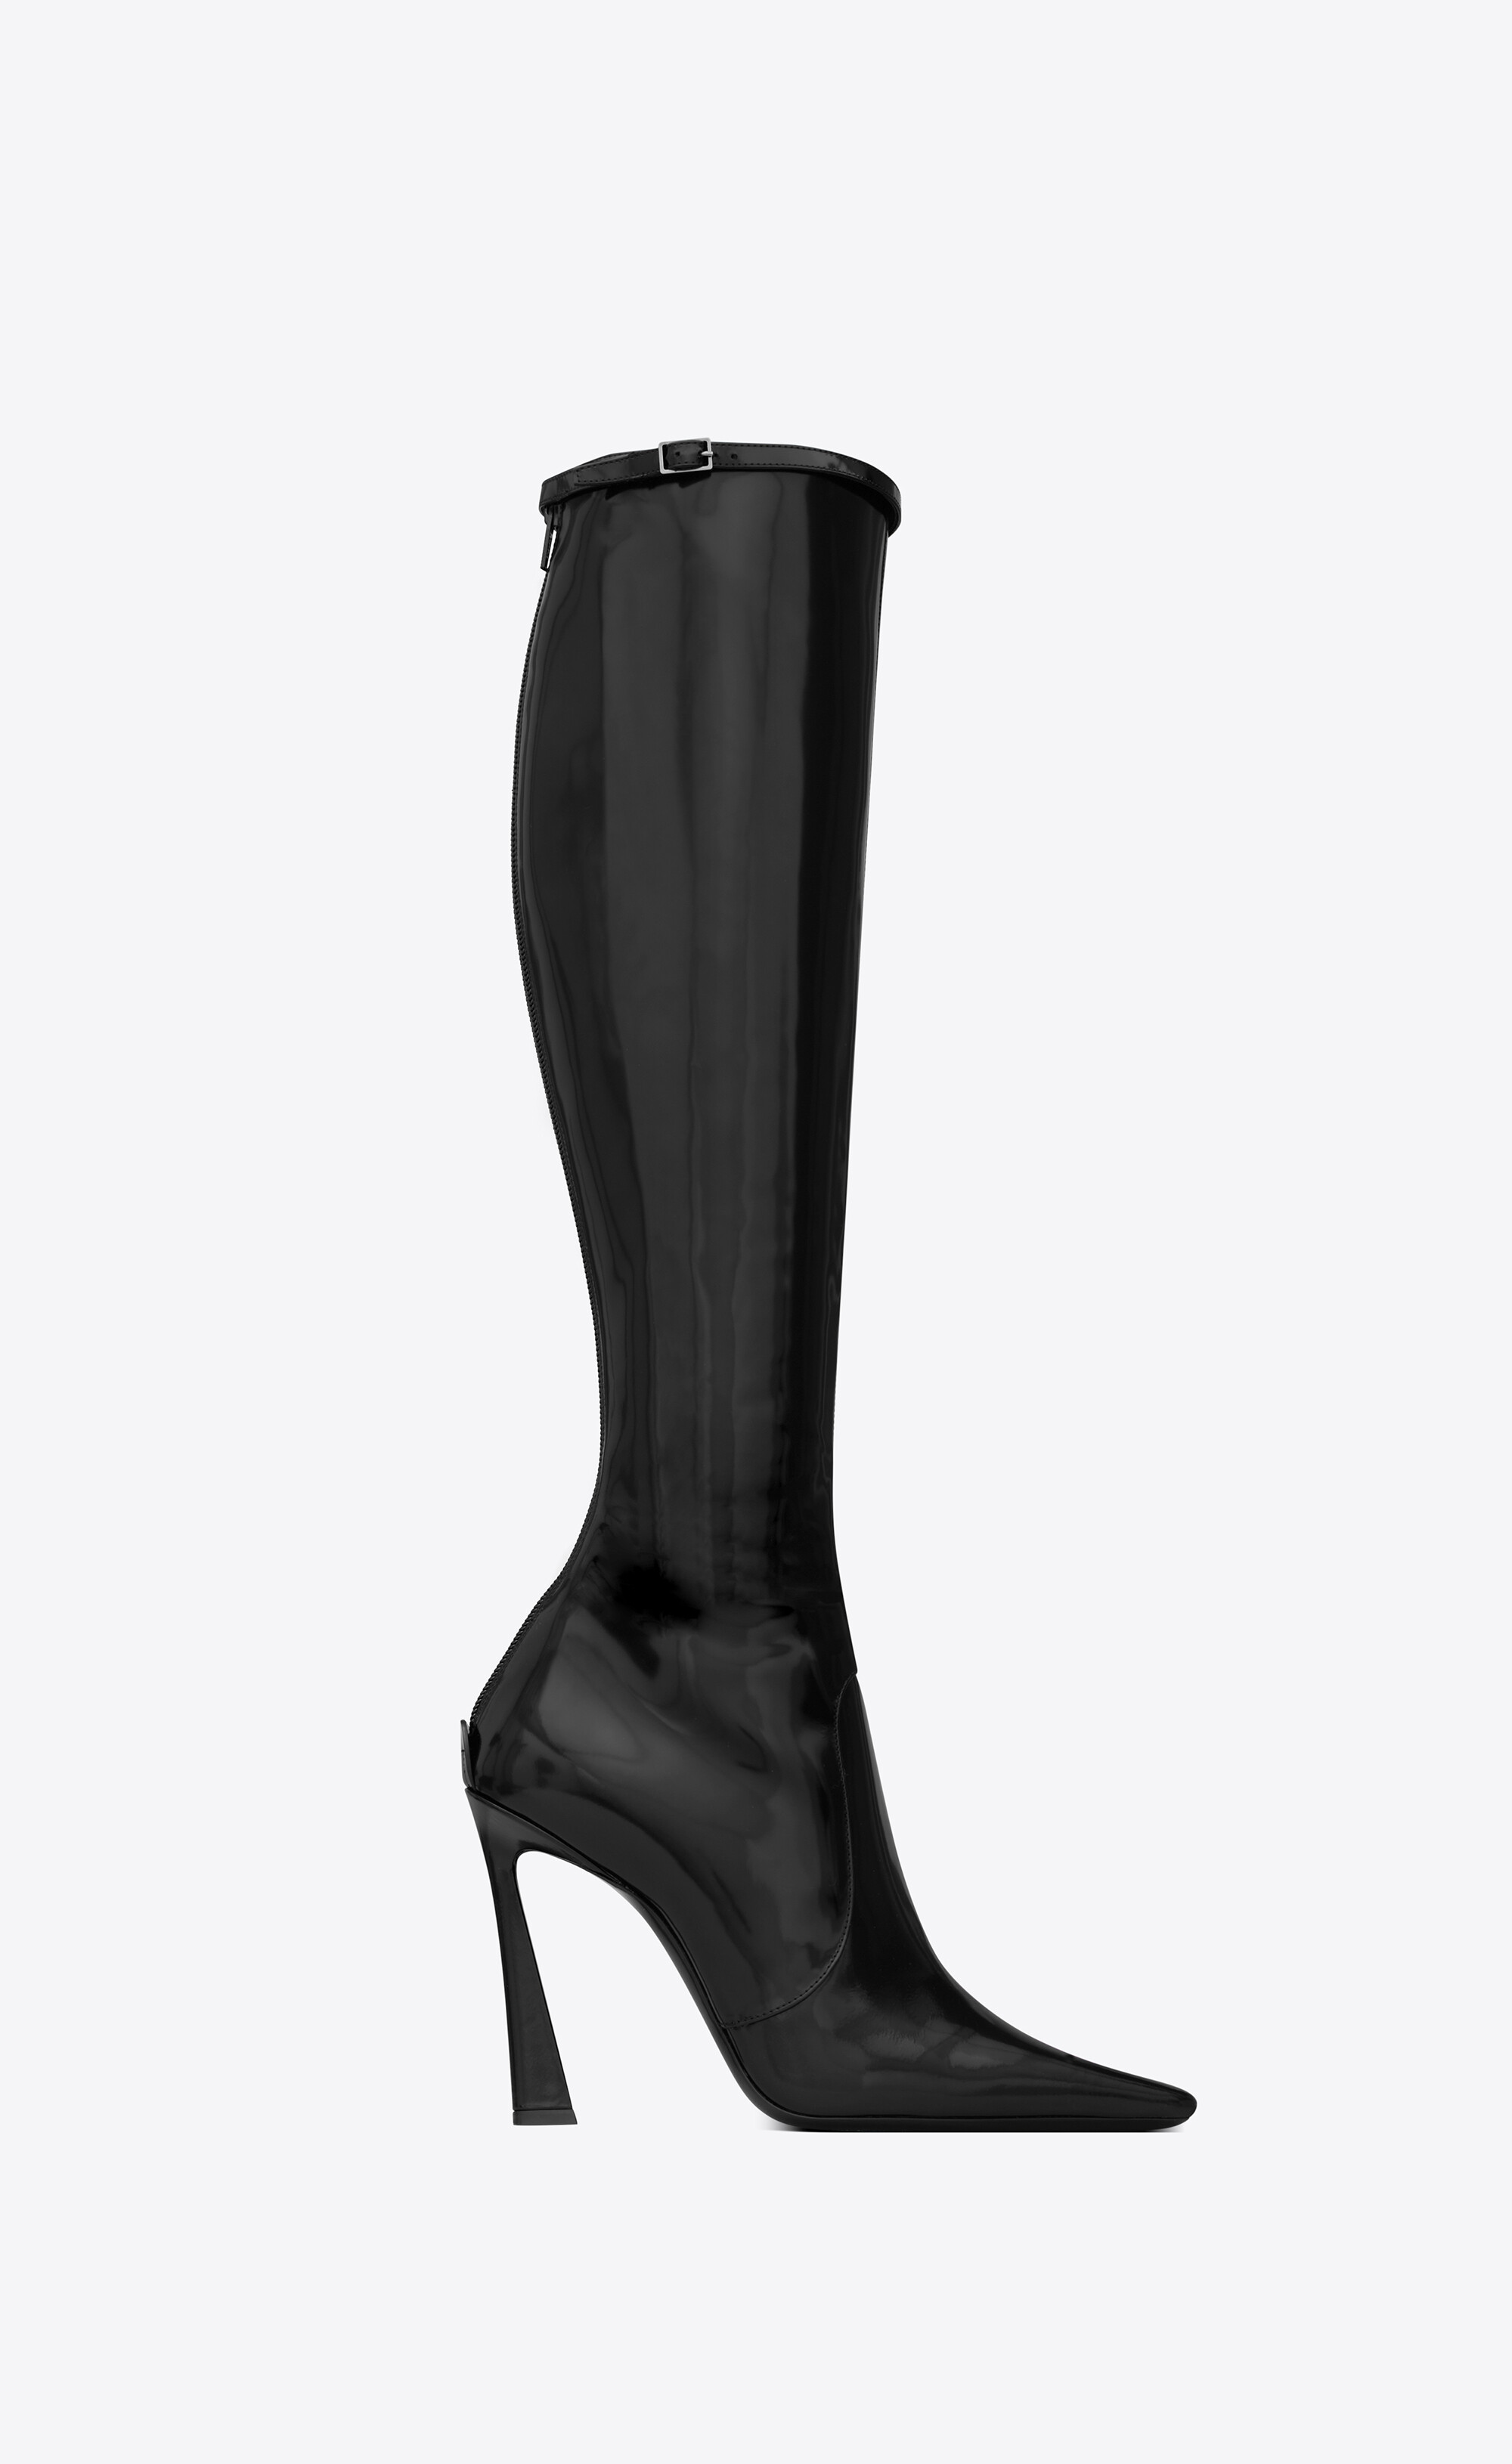 Oefenen Justitie rek Justify boots in shiny leather | Saint Laurent | YSL.com